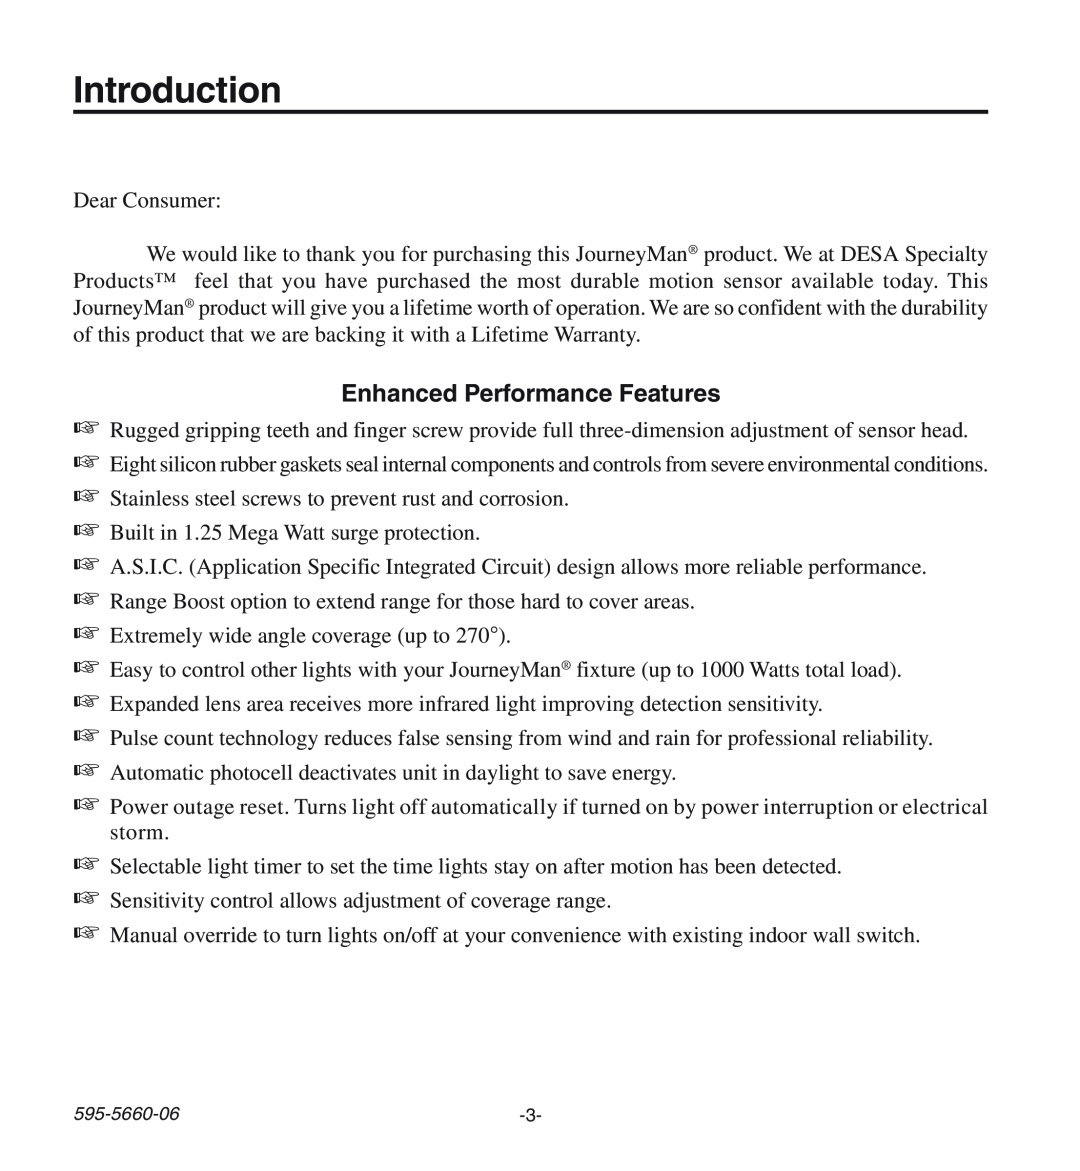 Desa HD-9140 manual Introduction, Enhanced Performance Features 